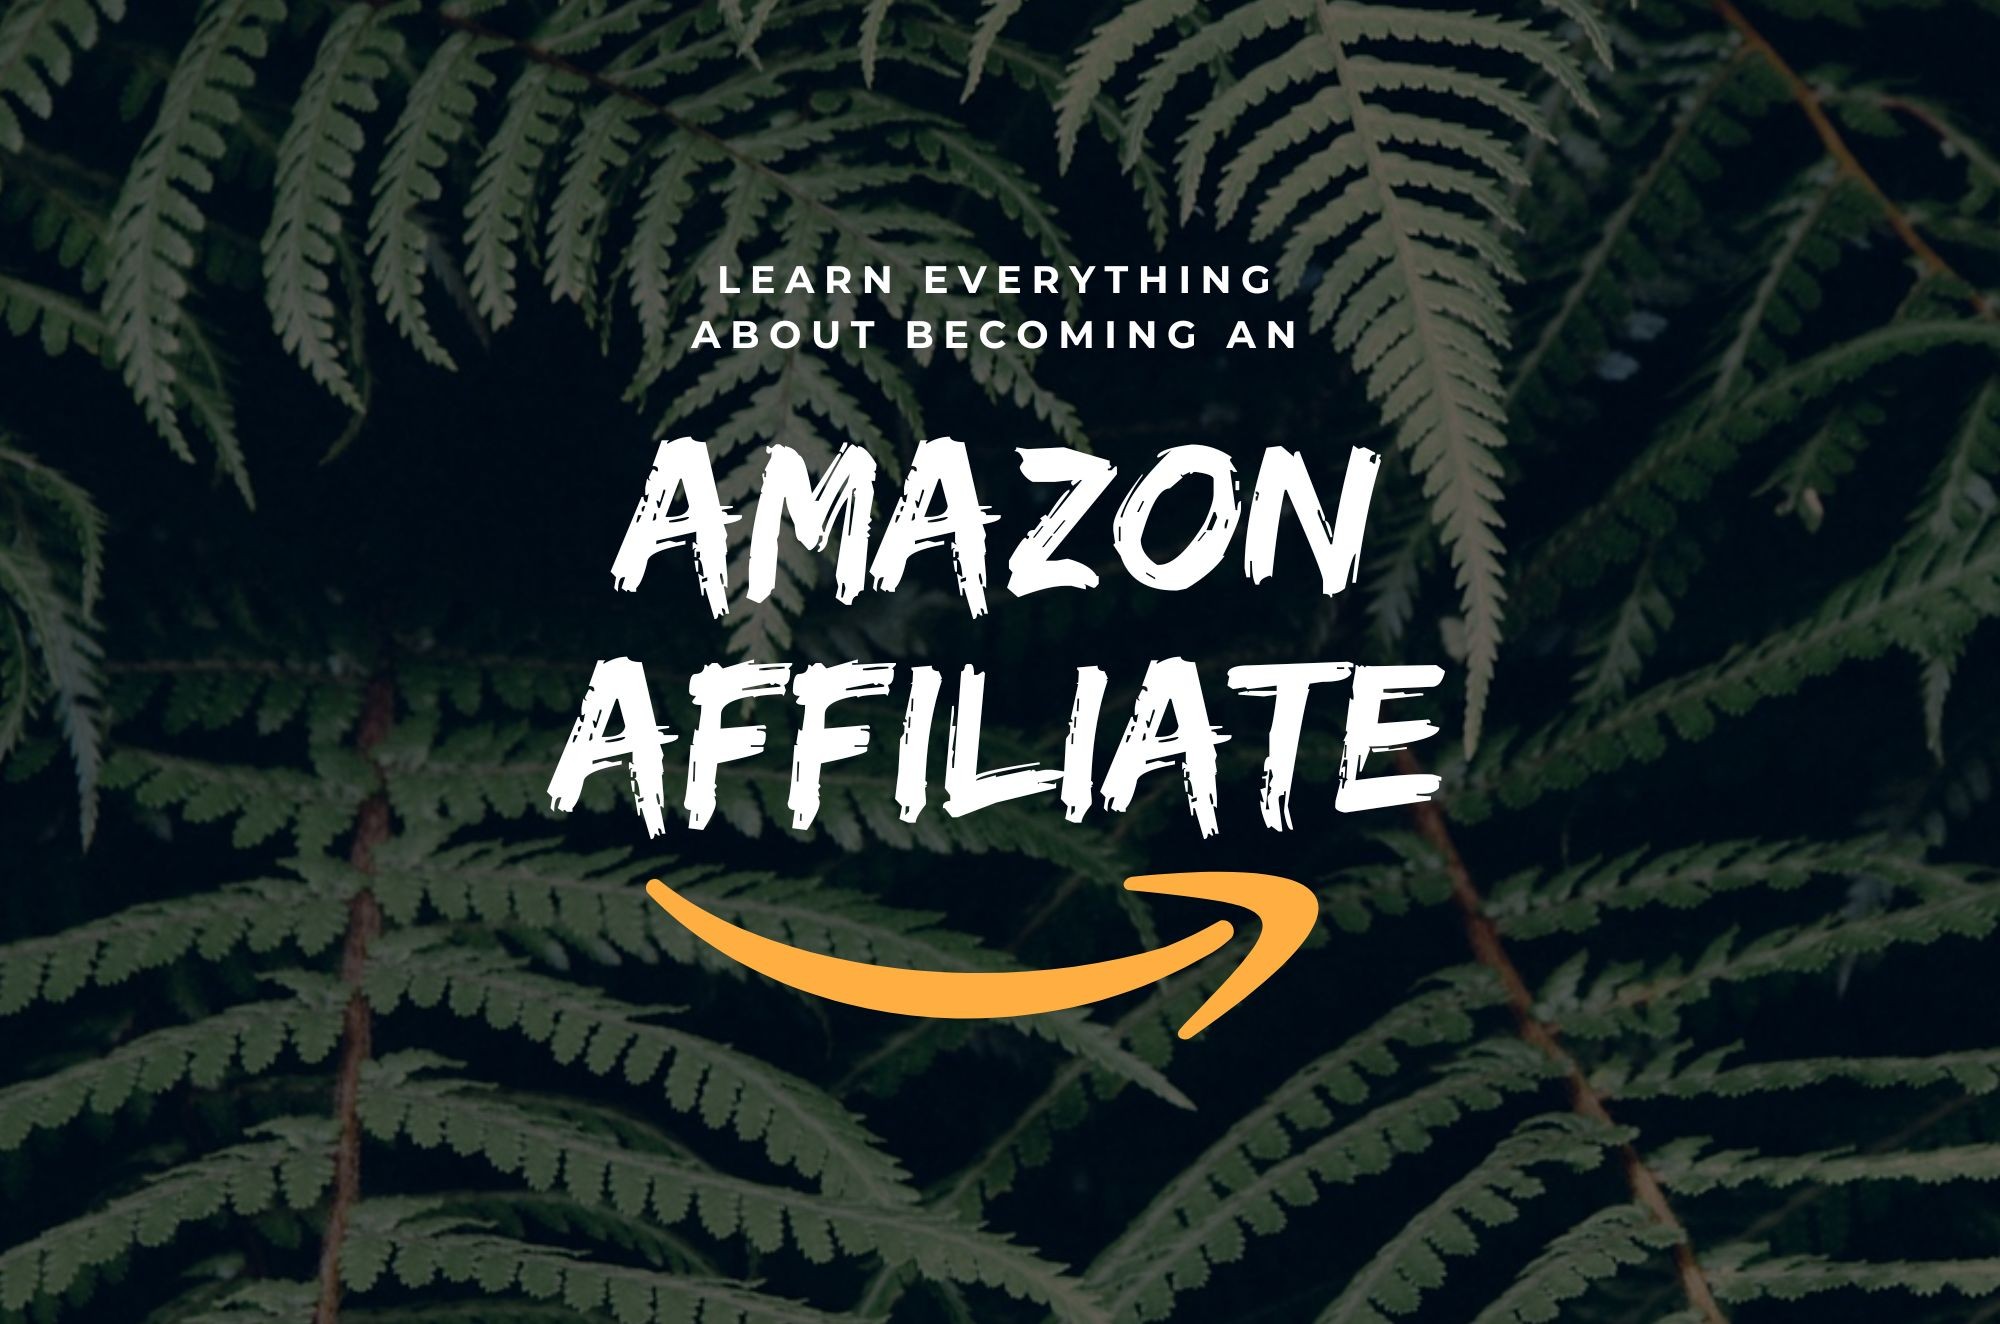 How to Become an Amazon Affiliate for Passive Income